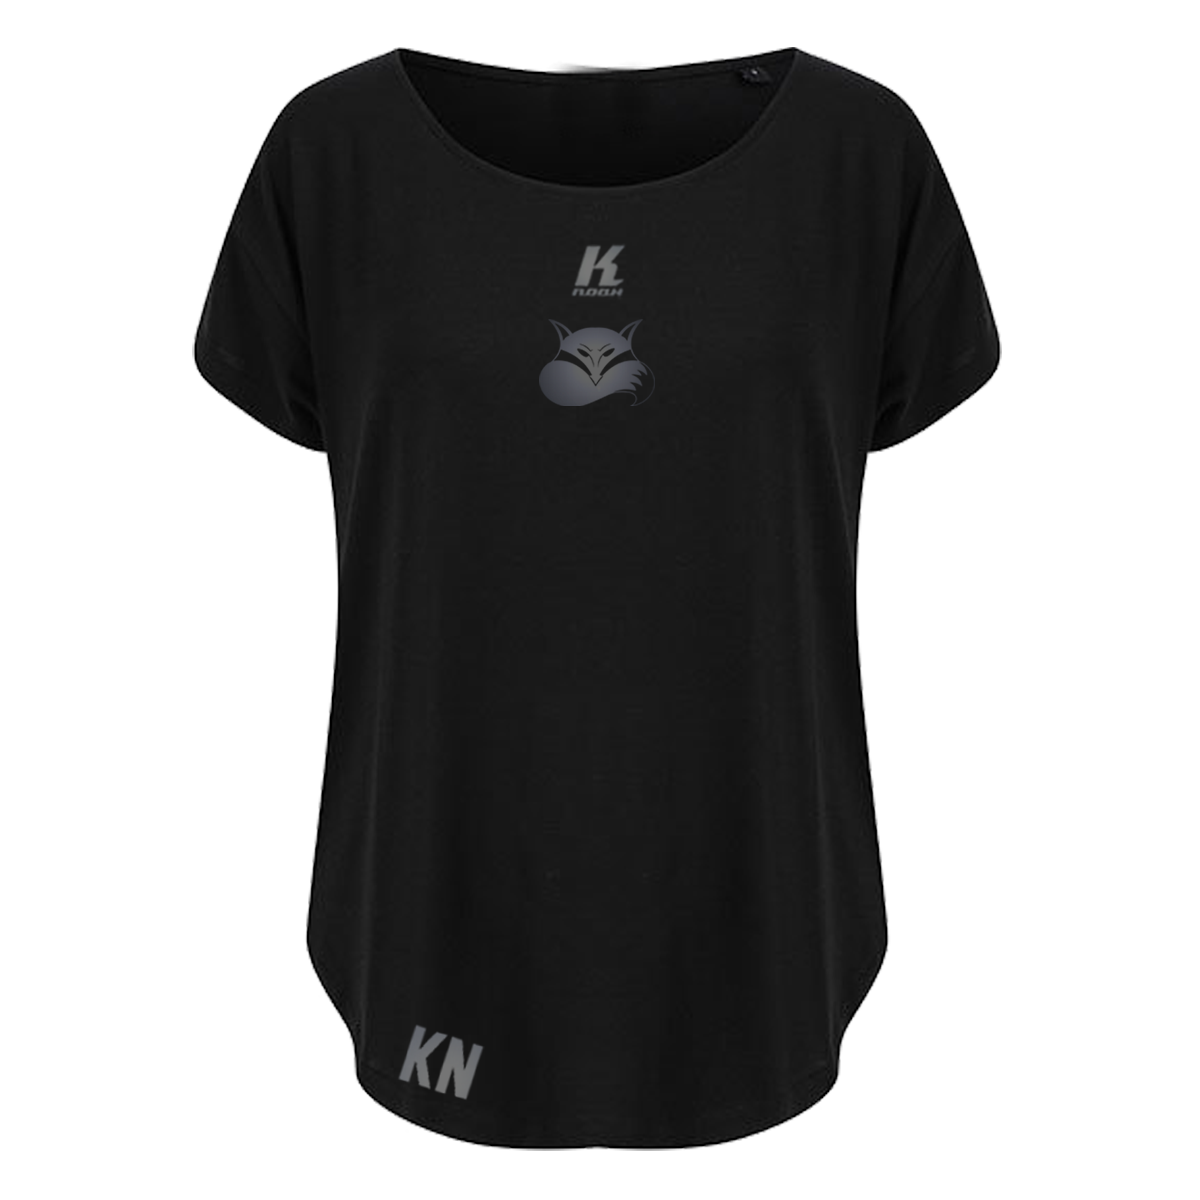 Foxes "Blackline" Womens Sports Tee TL527 with Initials/Playernumber